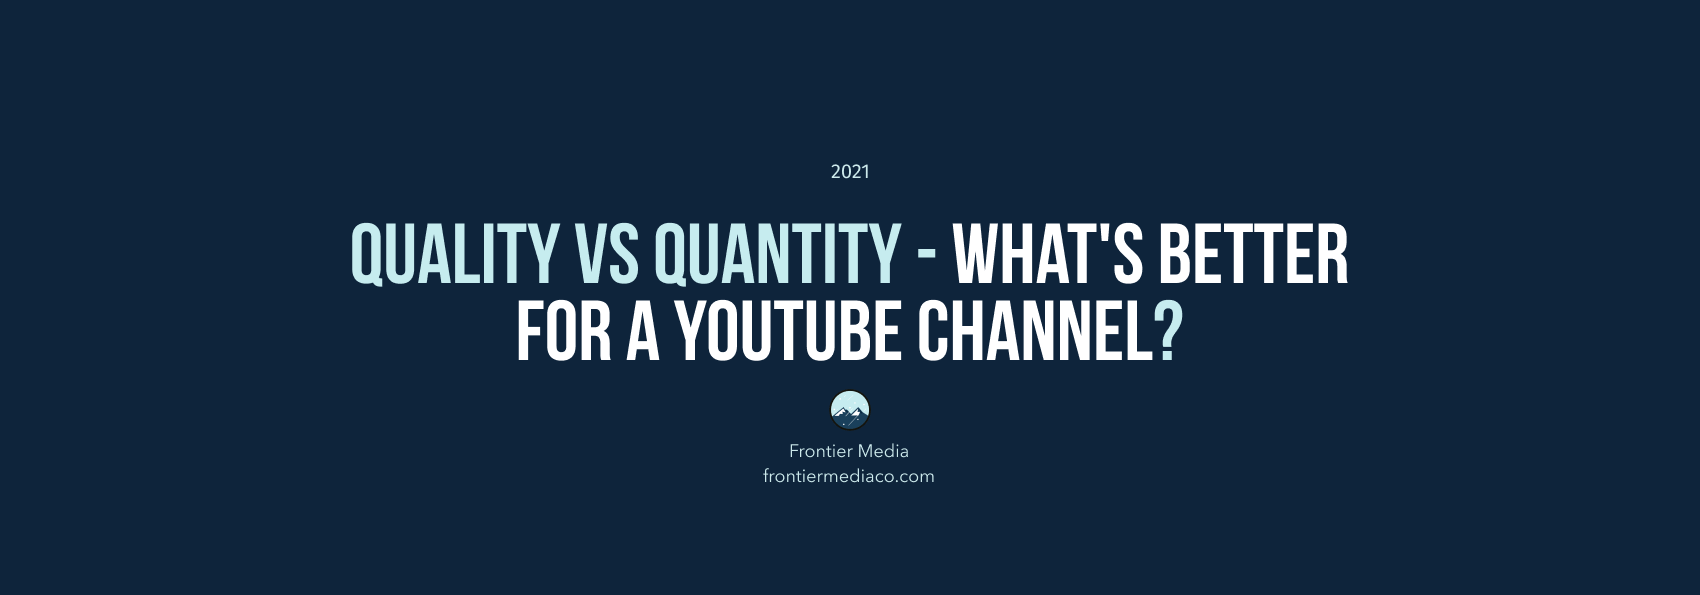 Quality vs Quantity - What's better for a YouTube Channel?